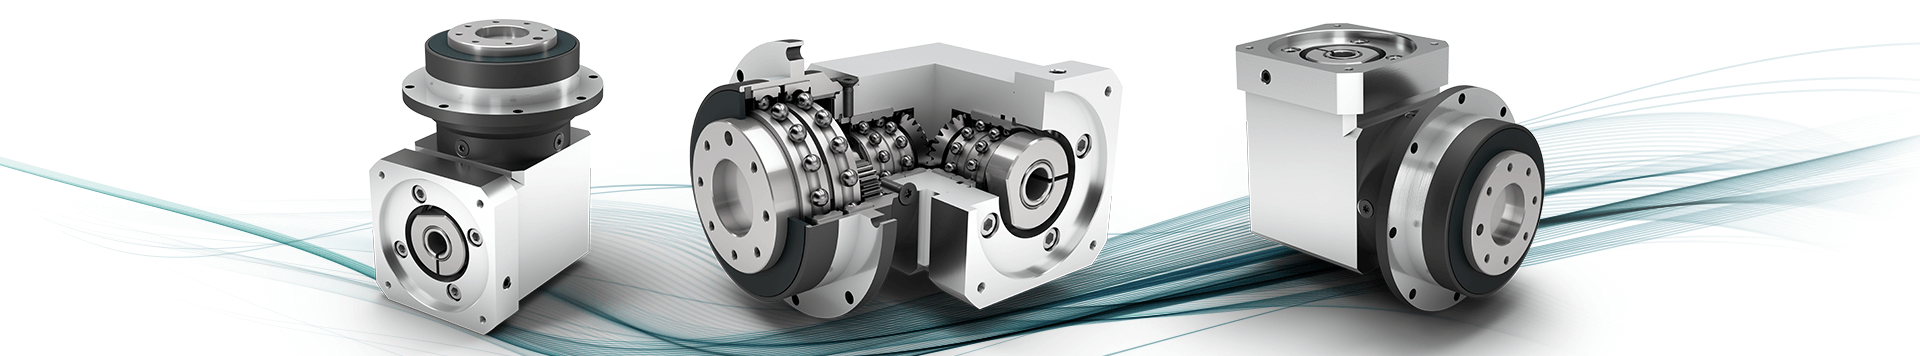 Boston Gear HF72415KB7HP20 Right Angle Gearbox Hollow Output Shaft 2.38 Center Distance 2.33 HP and 1159 in-lbs Output Torque at 1750 RPM NEMA 140TC Flange Input 1.250 Bore Diameter 15:1 Ratio